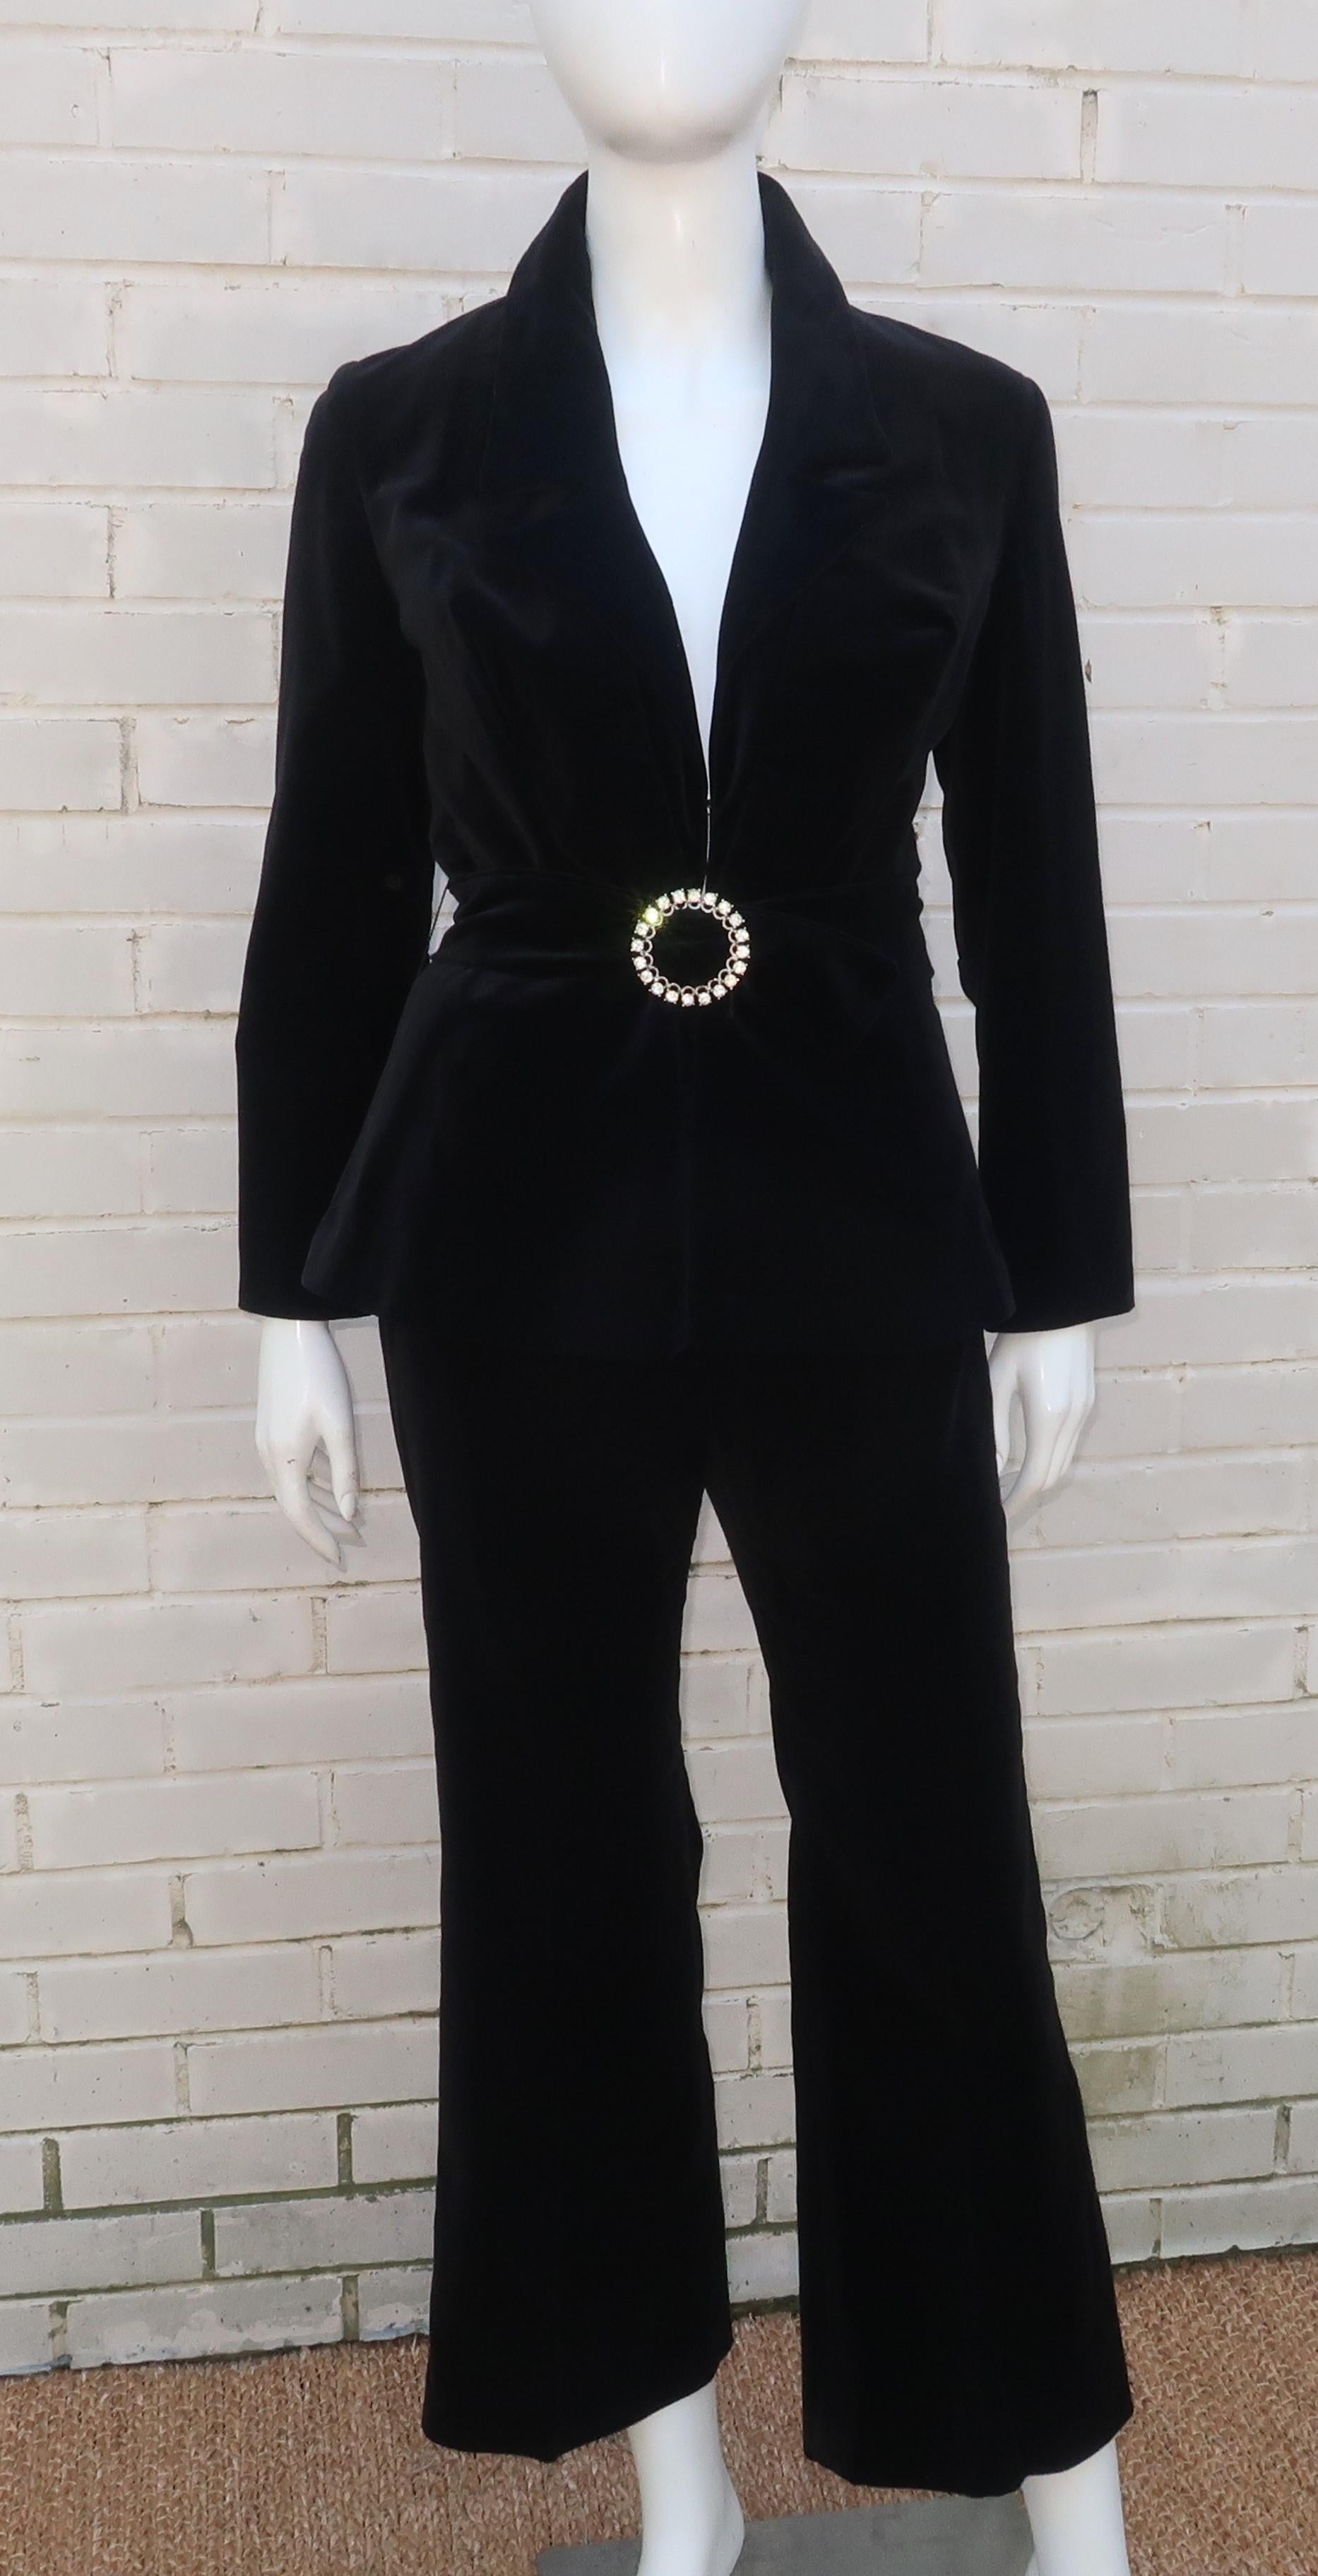 Fab C.1970 black velvet pant suit by Y.E.S. of California.  The jacket hooks at the front with a peplum silhouette and features a coordinating belt with rhinestone buckle.  The pants sit high on the waist and zip at the back with a slight bell